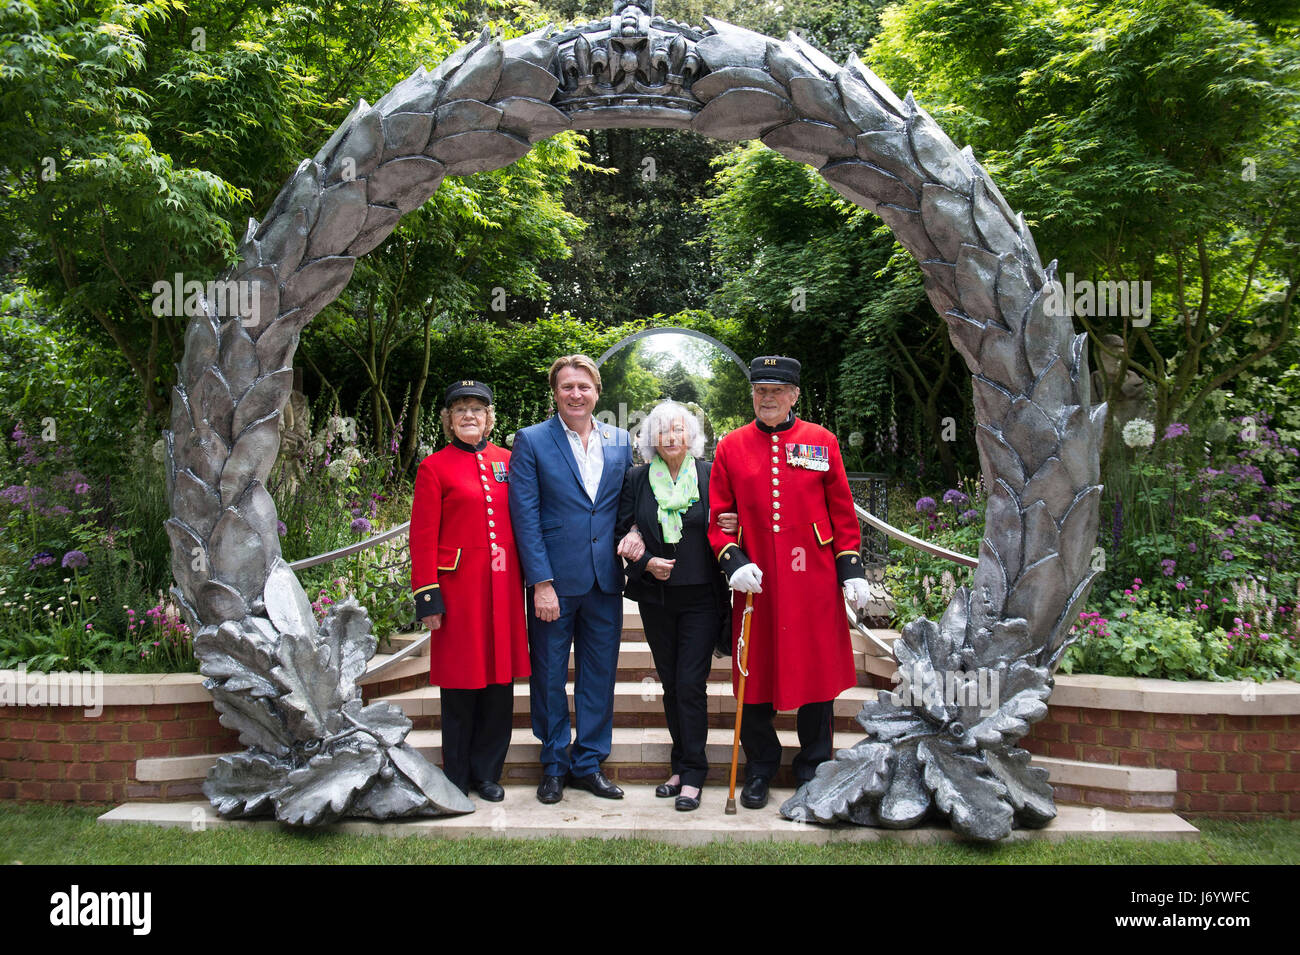 Chelsea Pensioners join garden designer David Domoney and Tania Szabo, daughter of WWII SOE Agent Violette Szabo, at the Commonwealth War Graves Commission (CWGC) Centenary Garden during the press preview of the RHS Chelsea Flower Show at the Royal Hospital Chelsea, London. Stock Photo